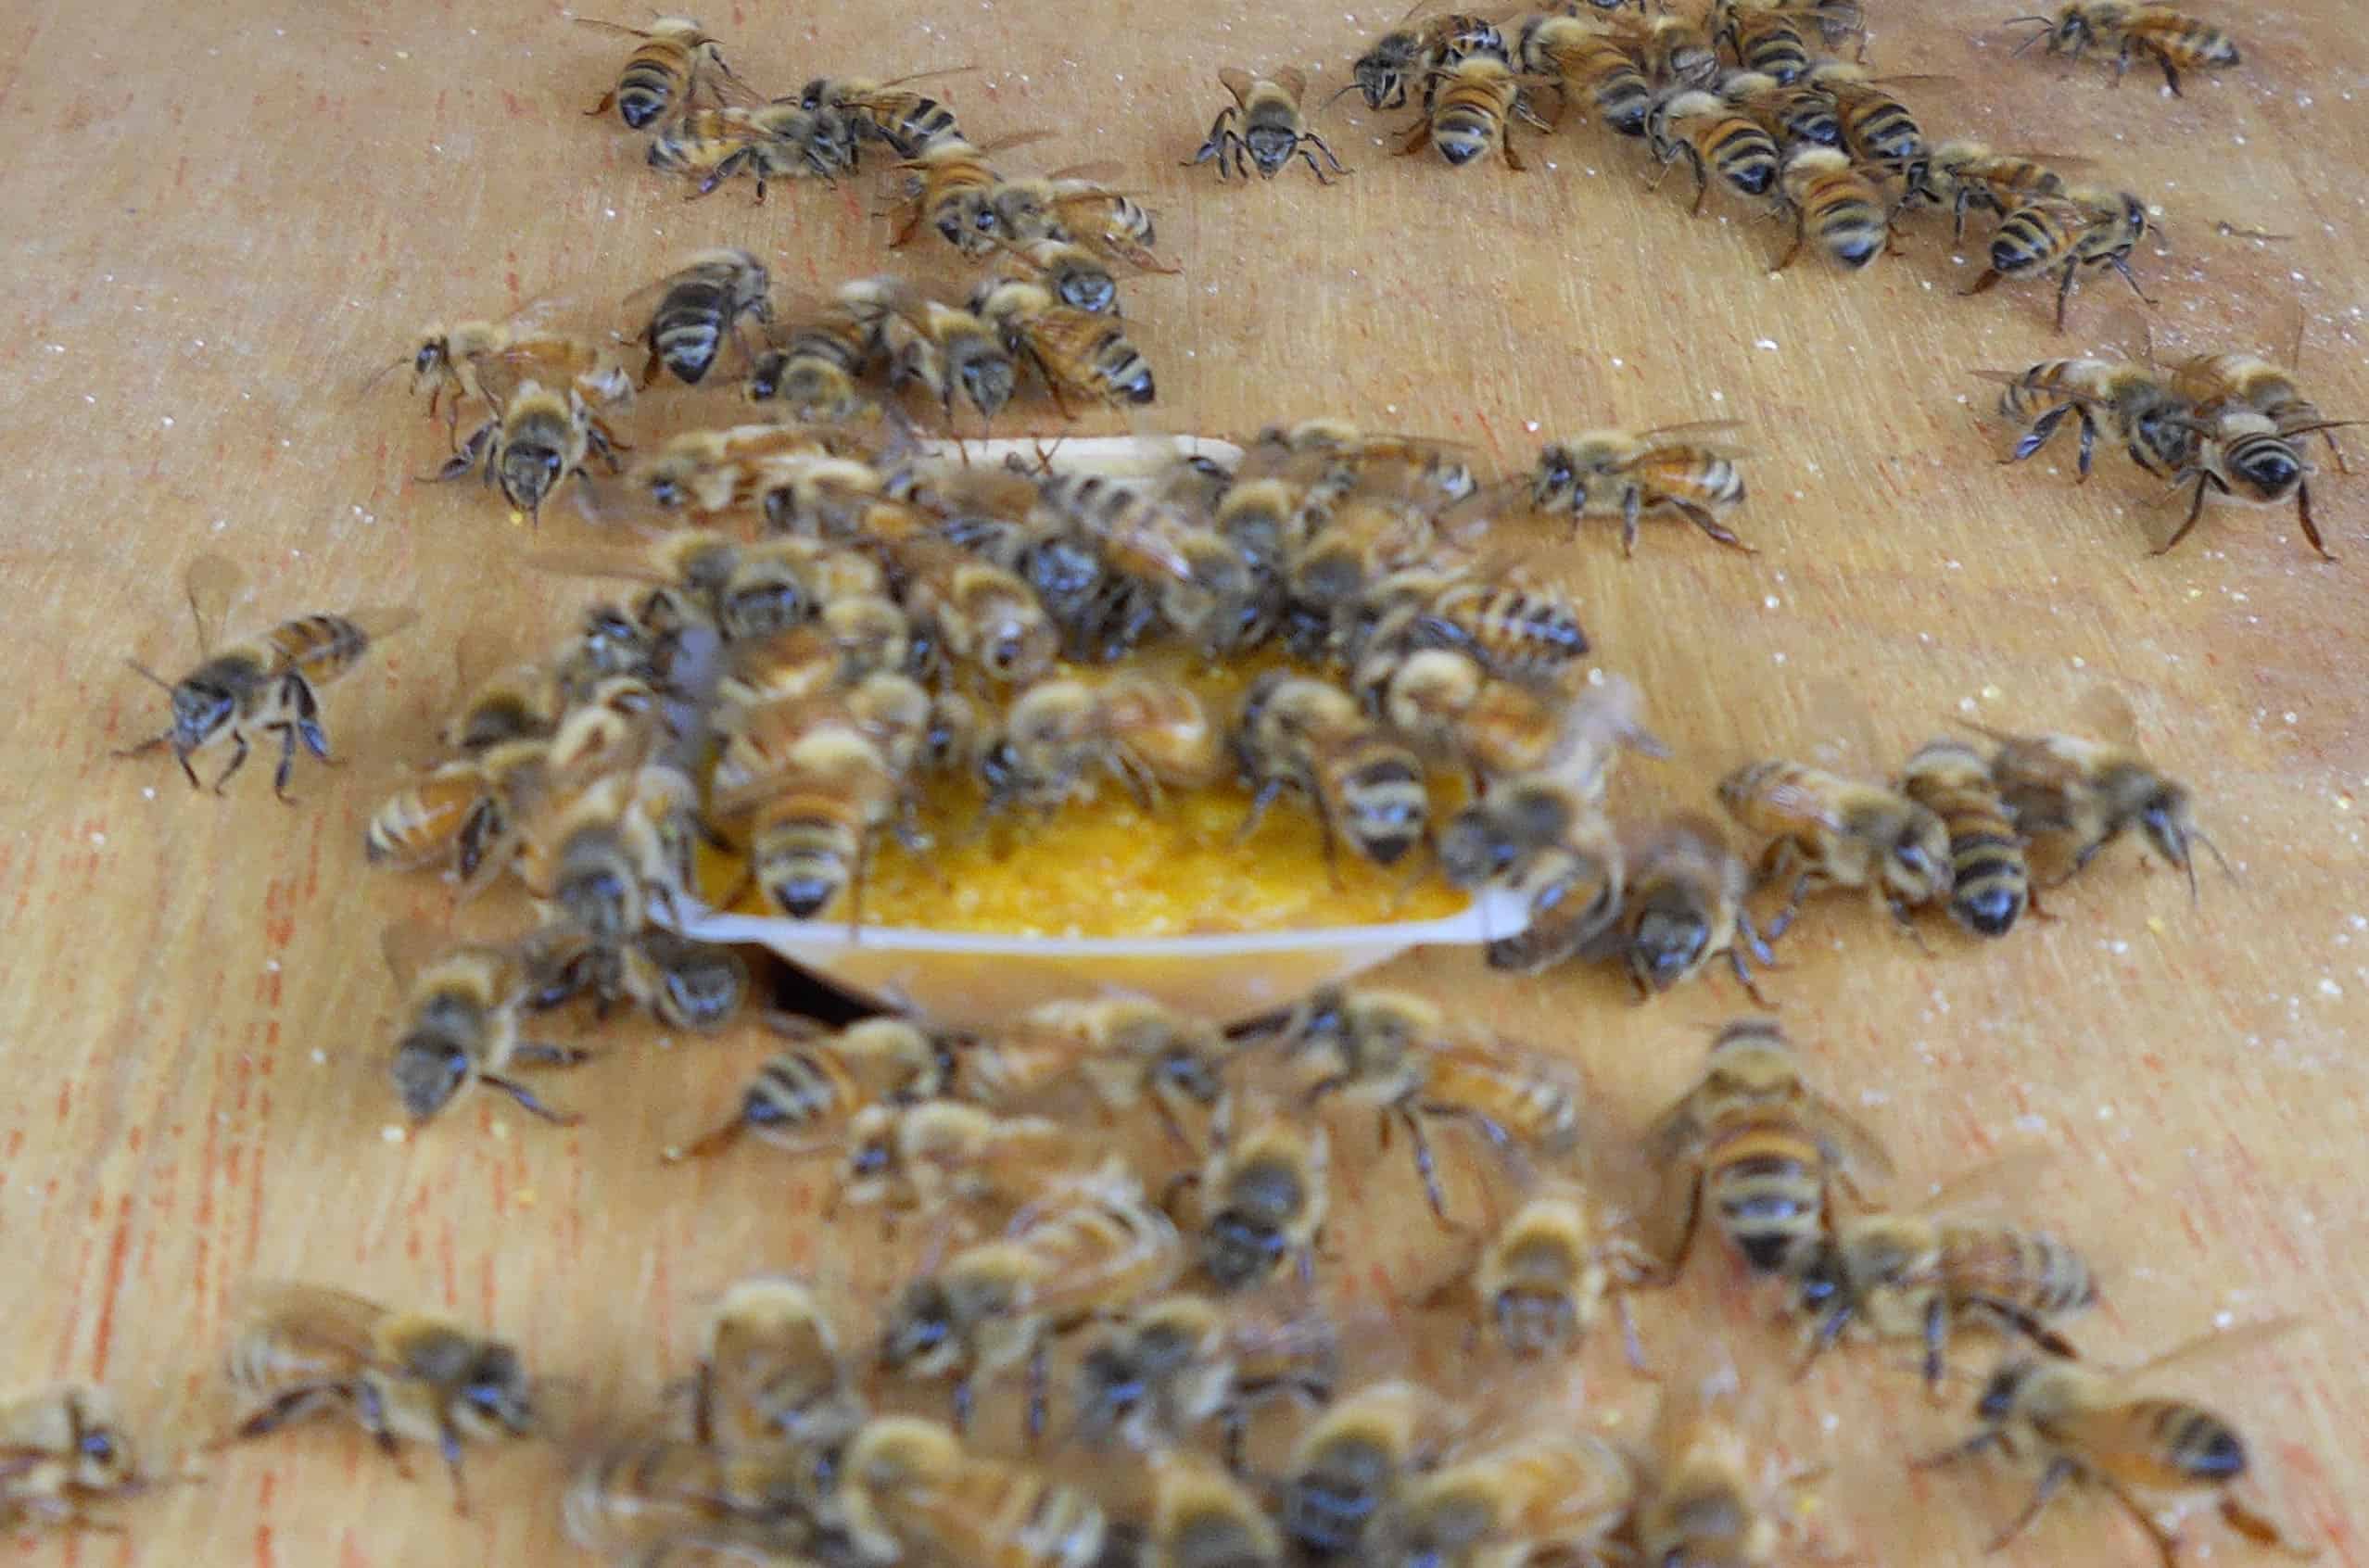 bees eating treatment